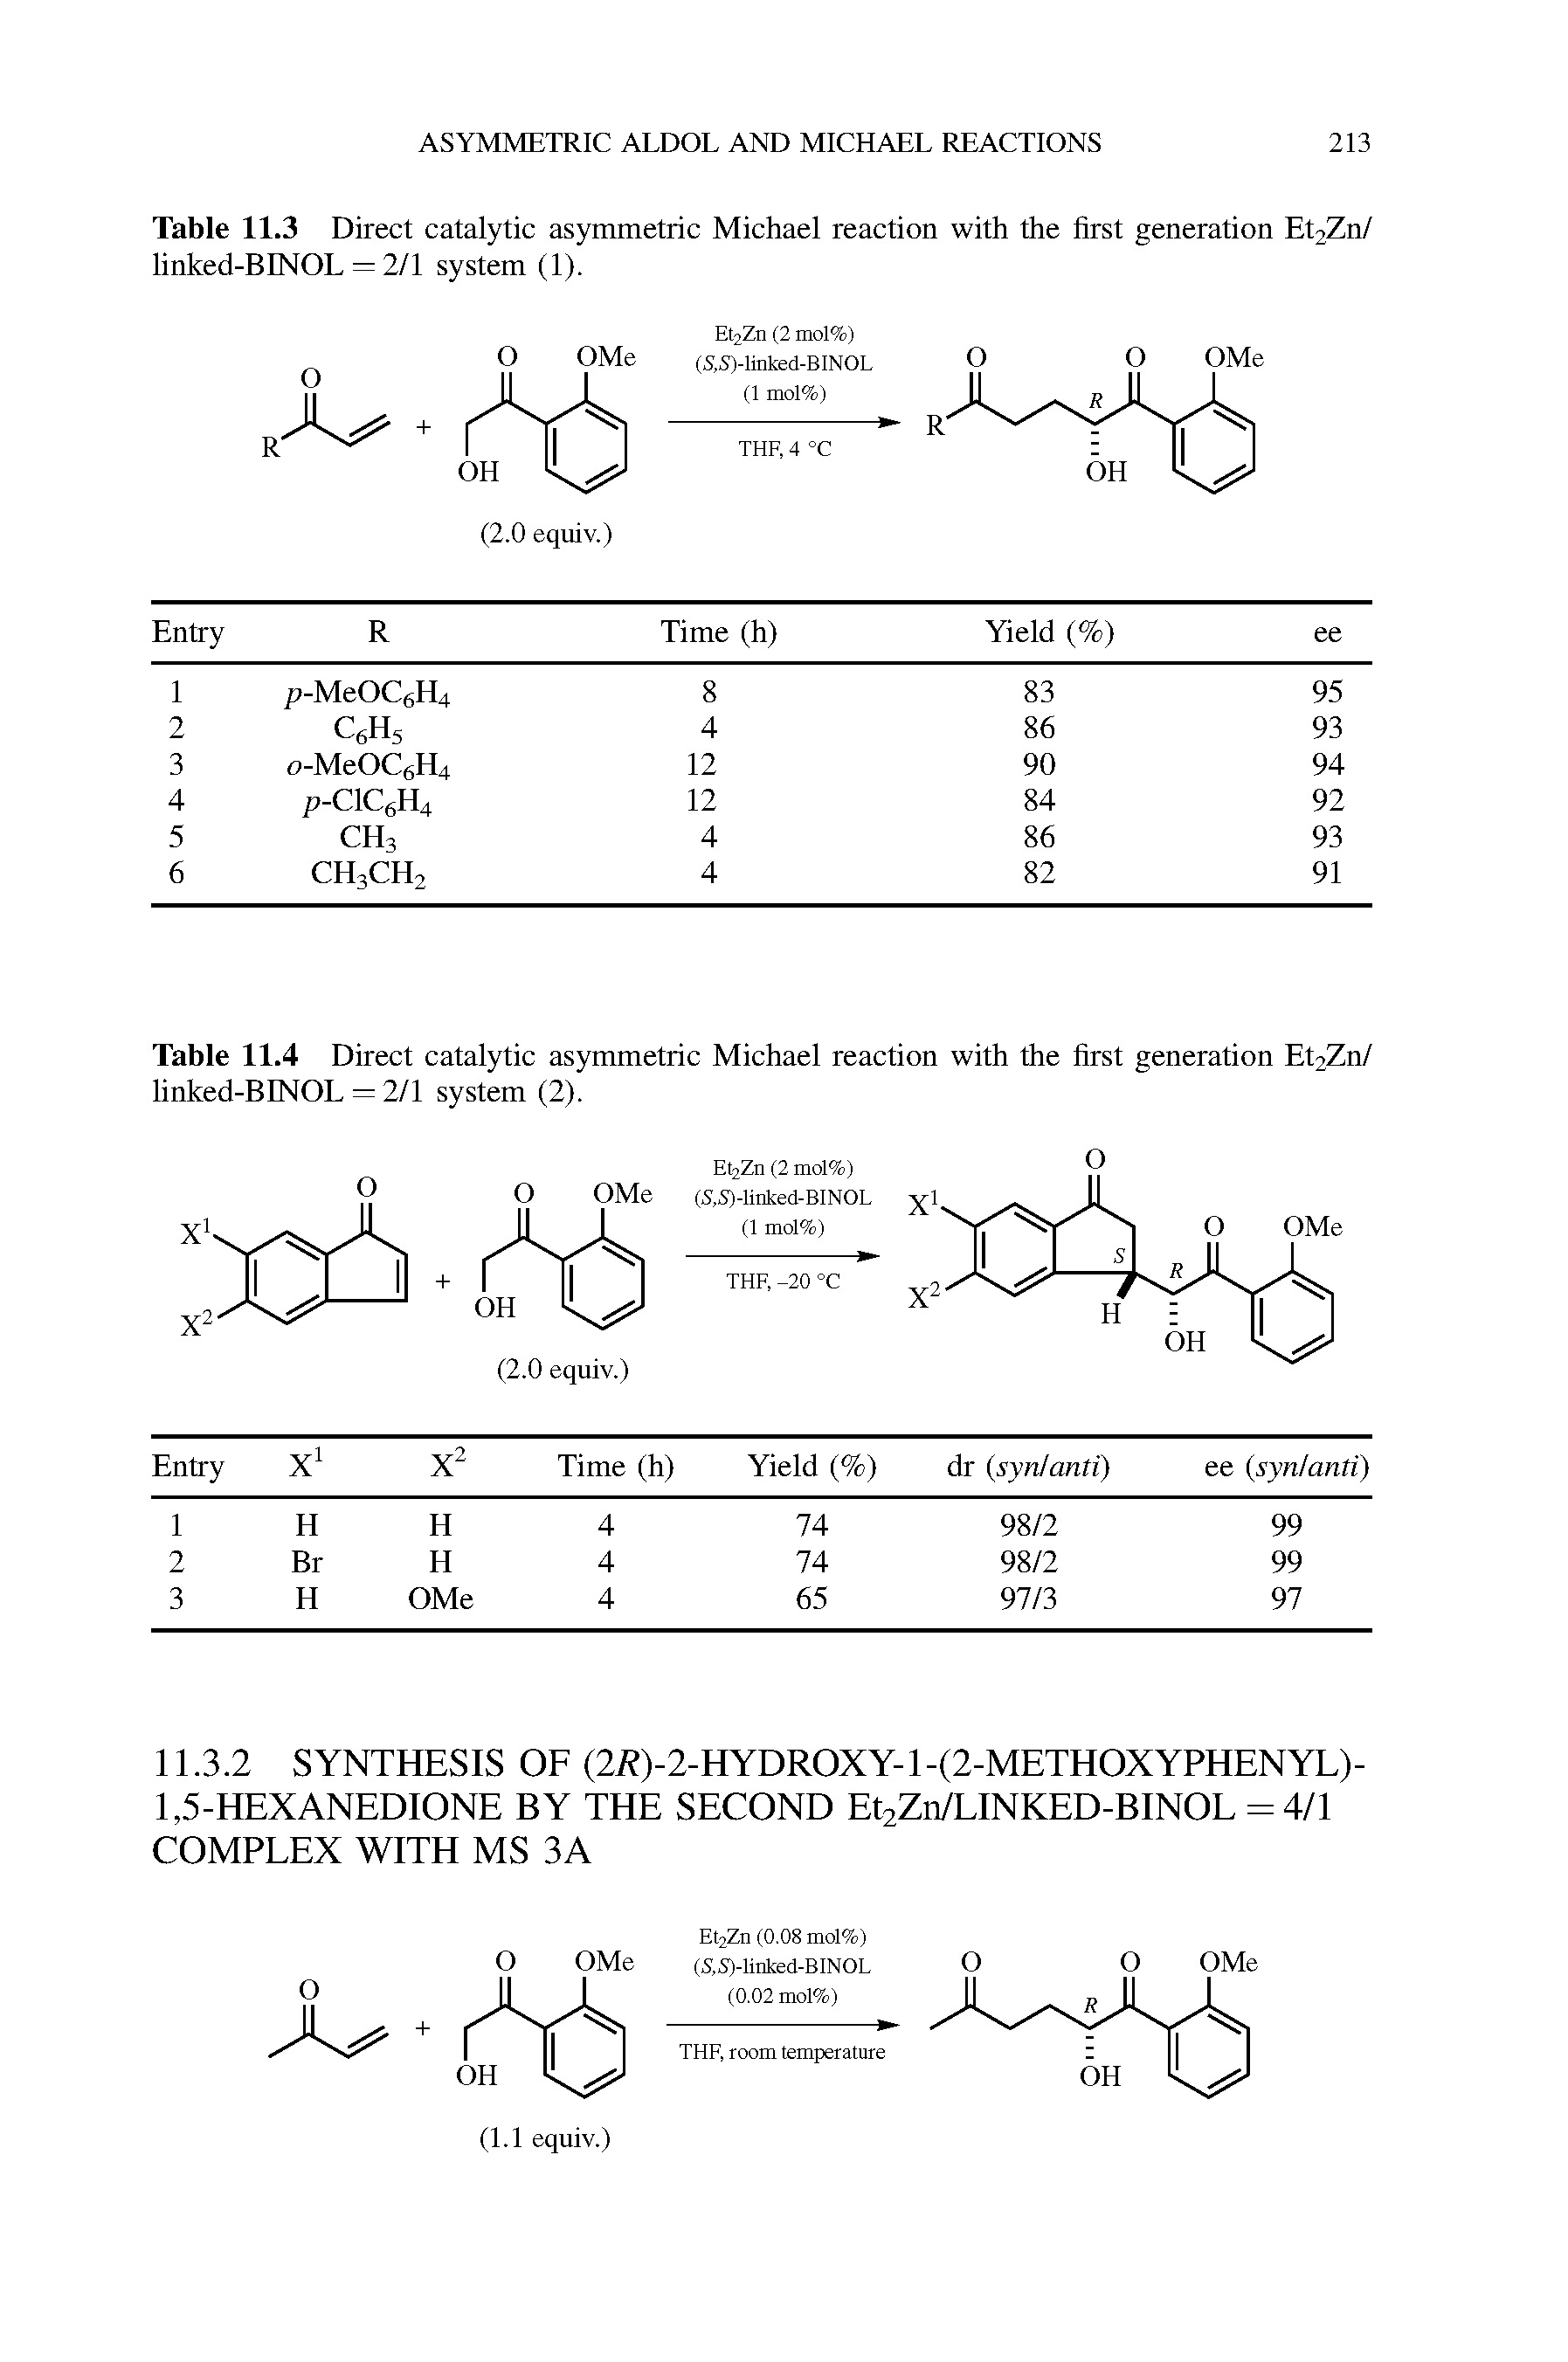 Table 11.3 Direct catalytic asymmetric Michael reaction with the first generation Et2Zn/ linked-BINOL = 2/1 system (1).